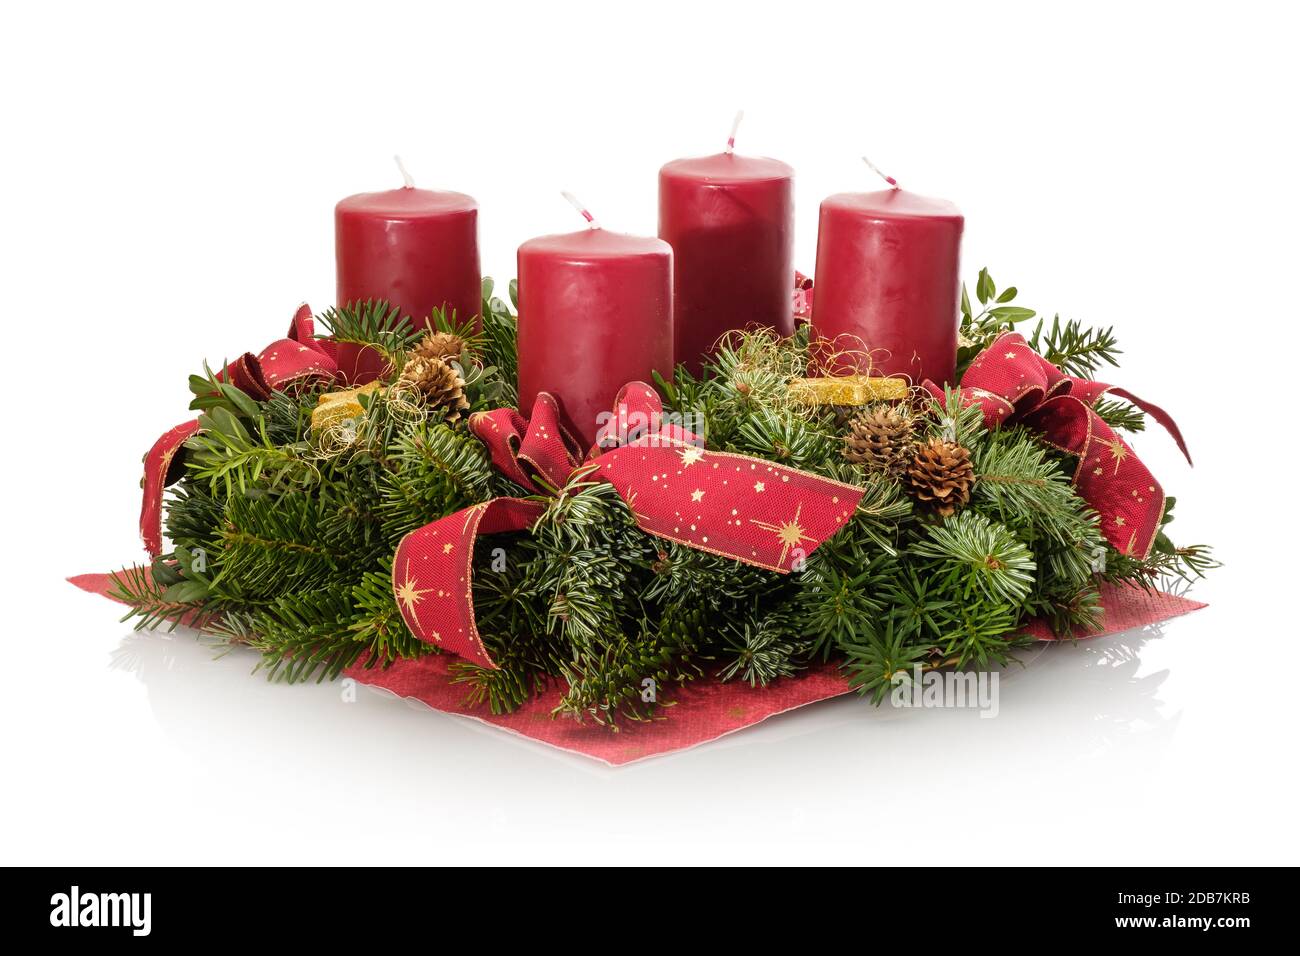 Advent wreath with four candles and fir branches Stock Photo